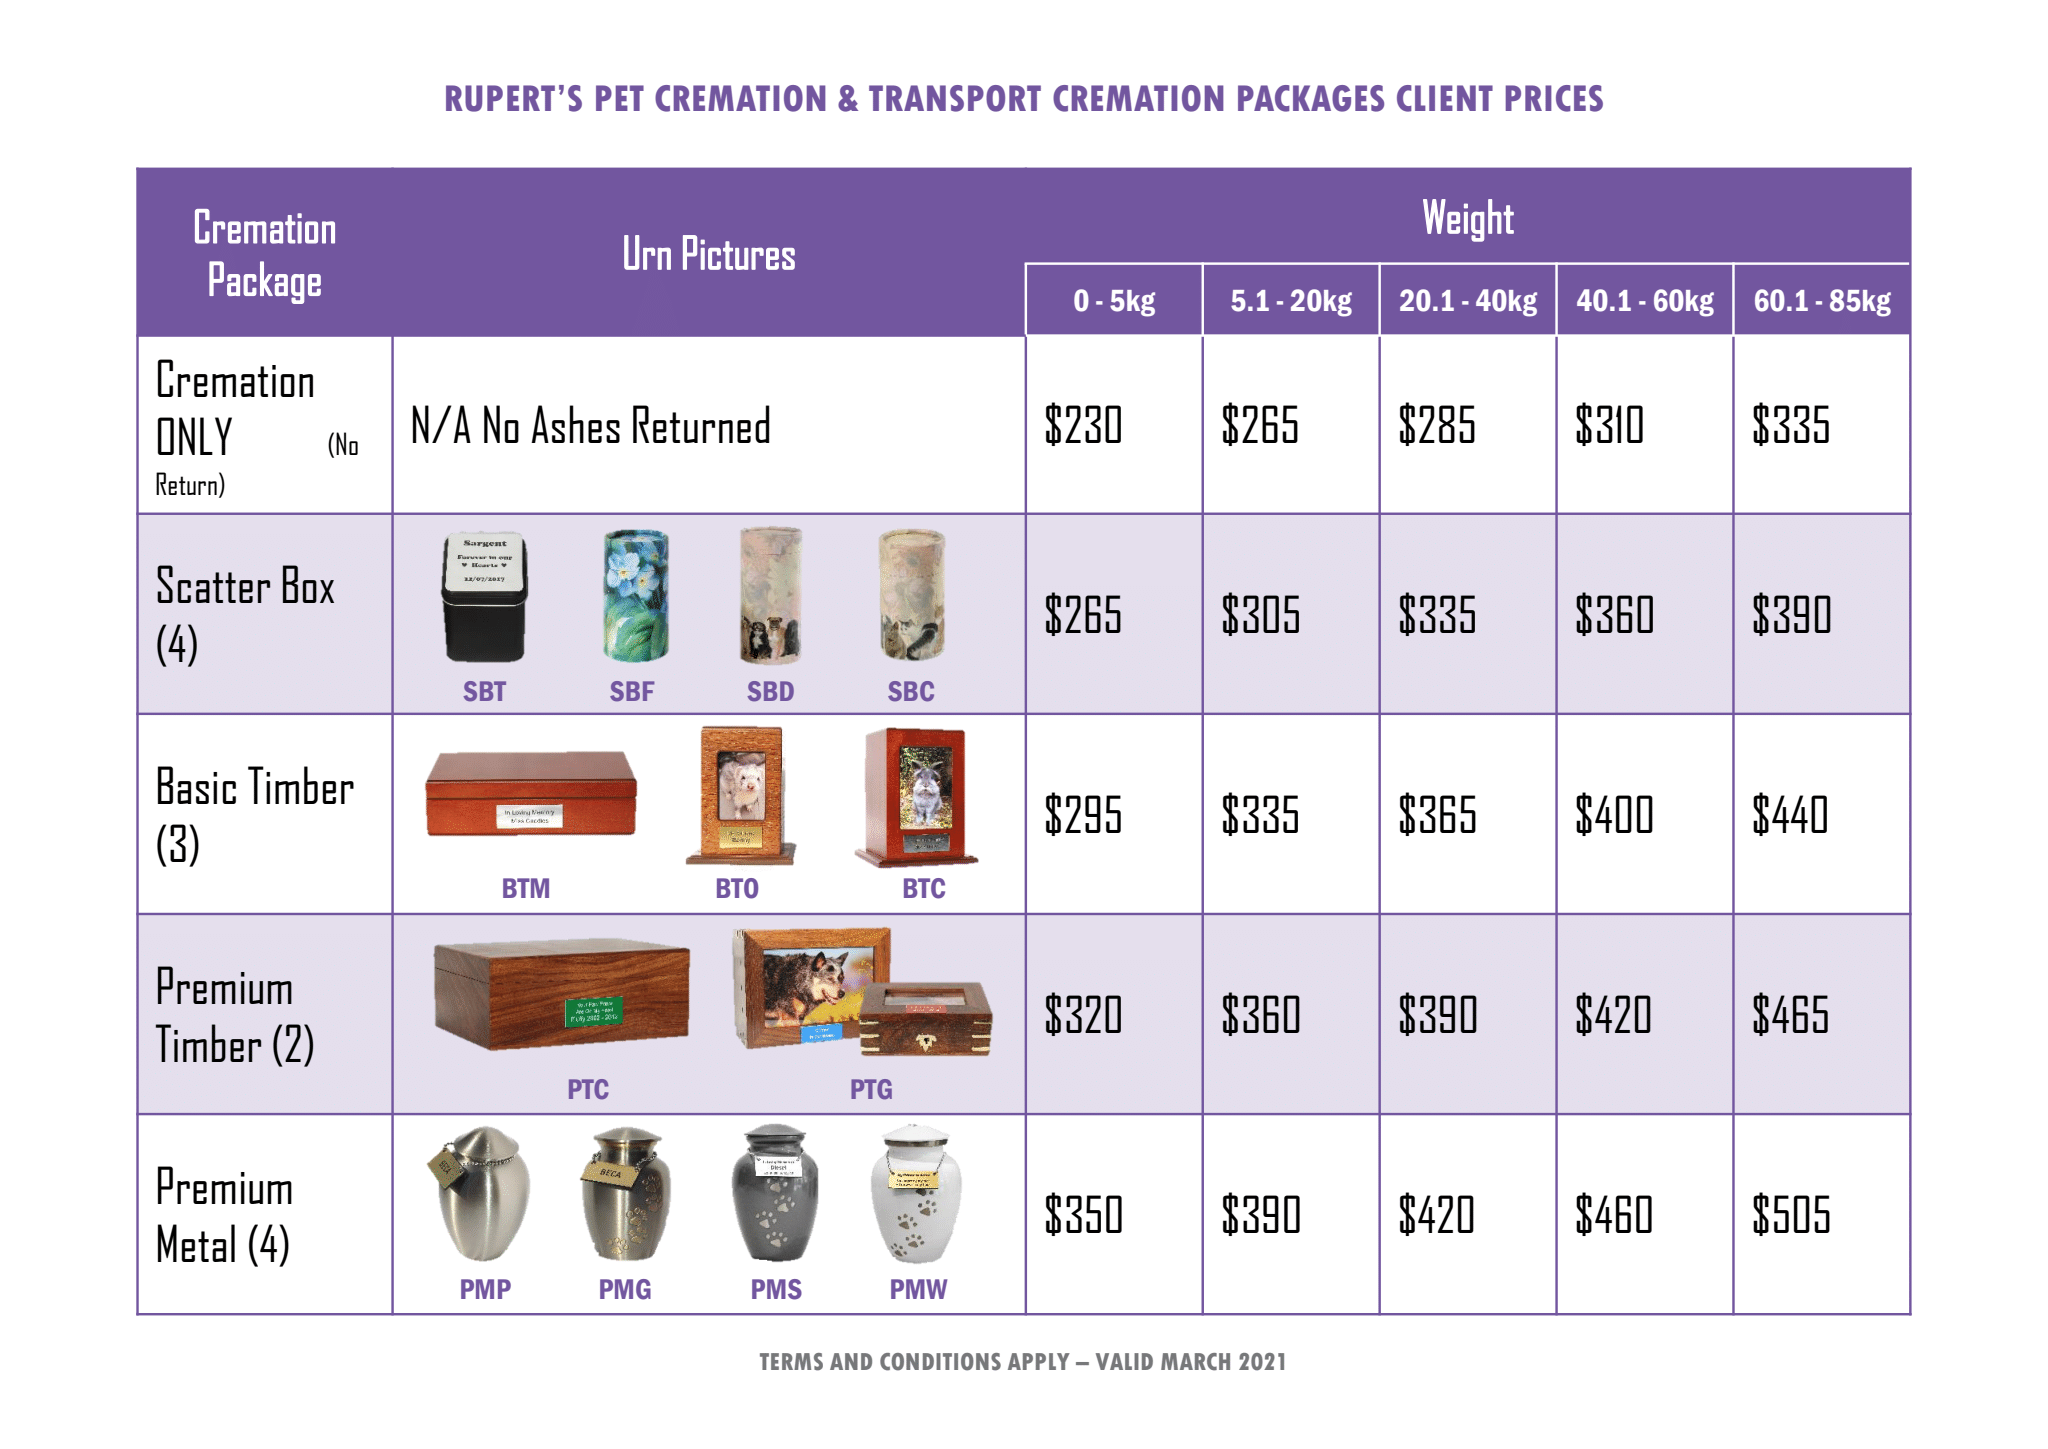 cremation packages client prices